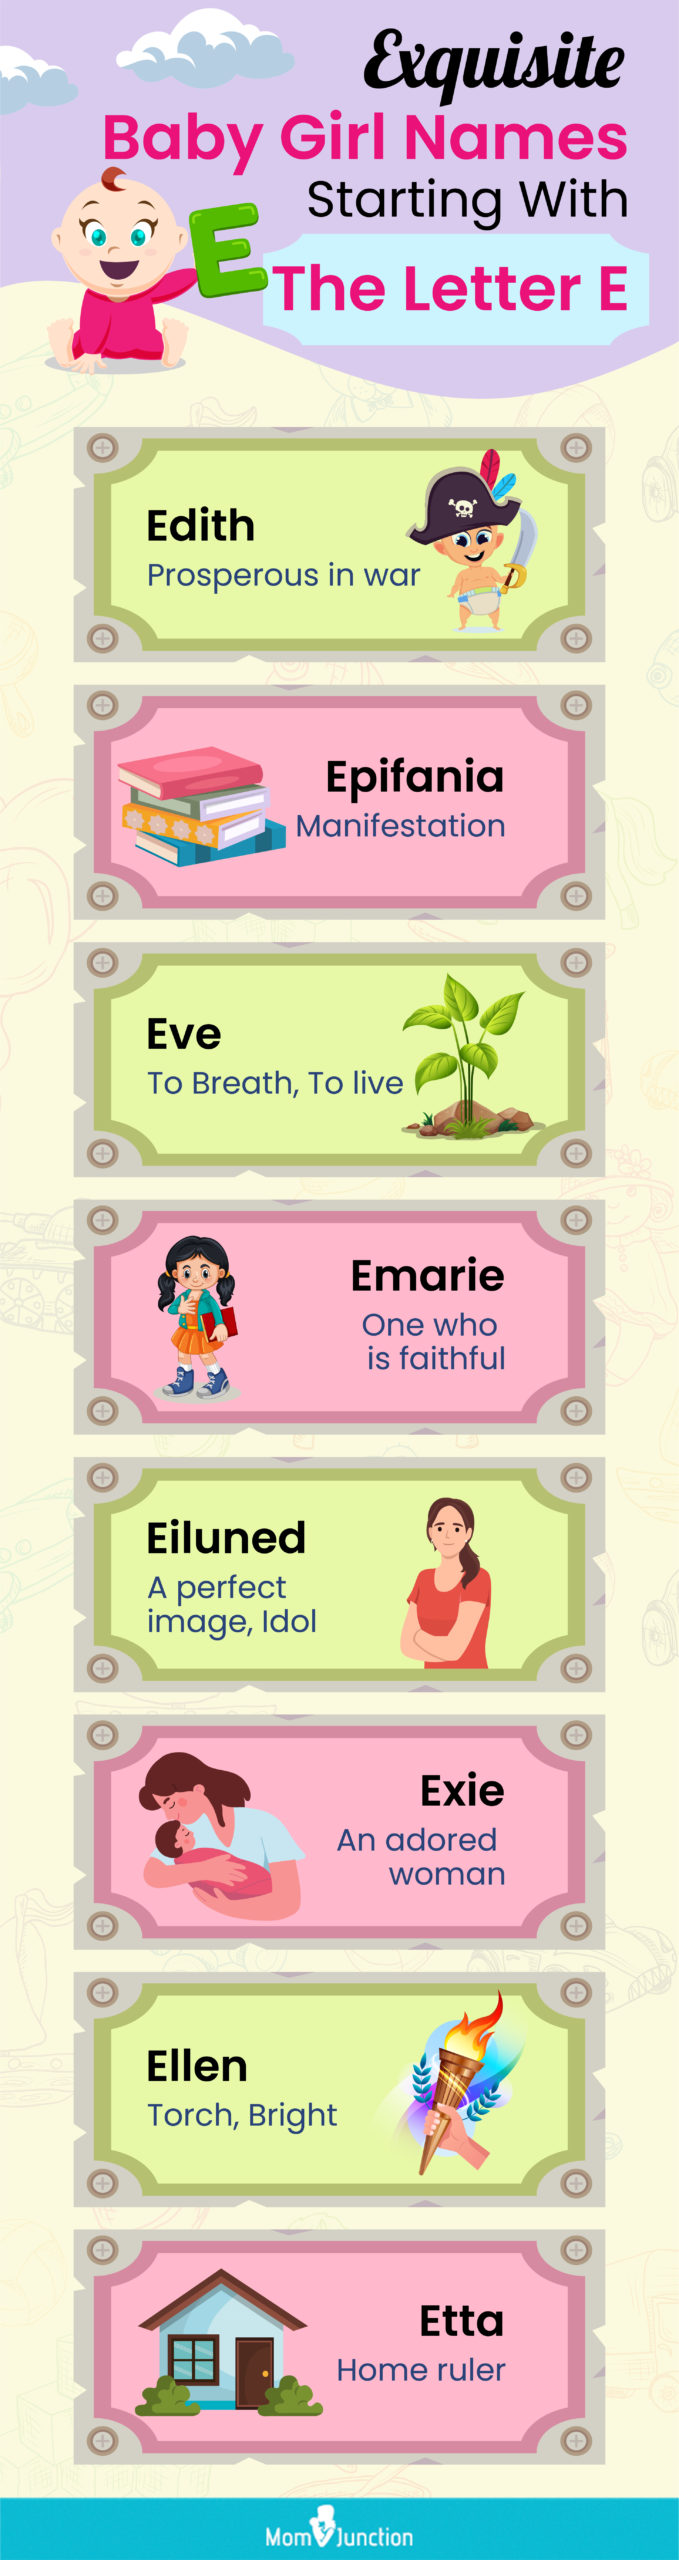 exquisite baby girl names starting with the letter e (infographic)